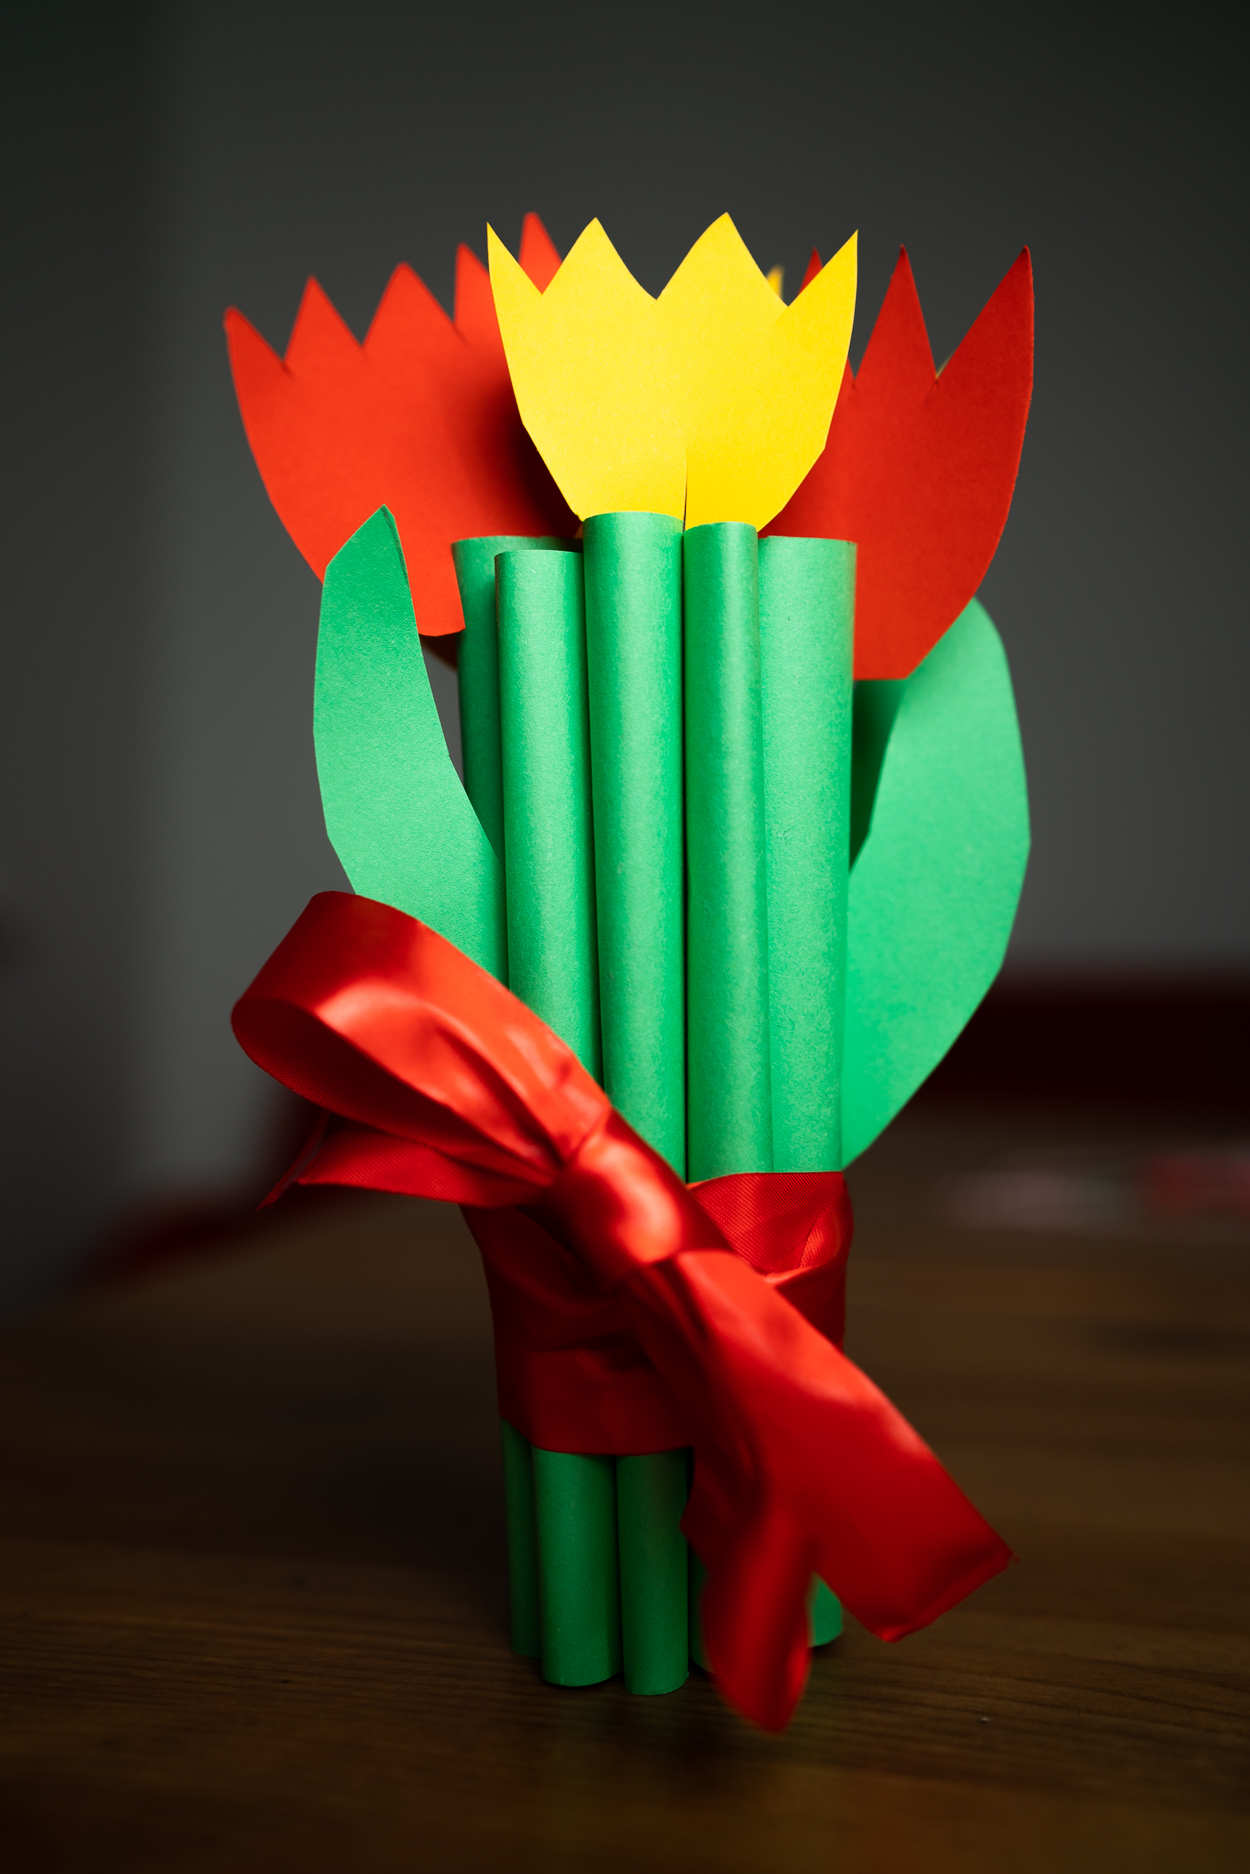 Add a red ribbon bow to the bouquet and voila!